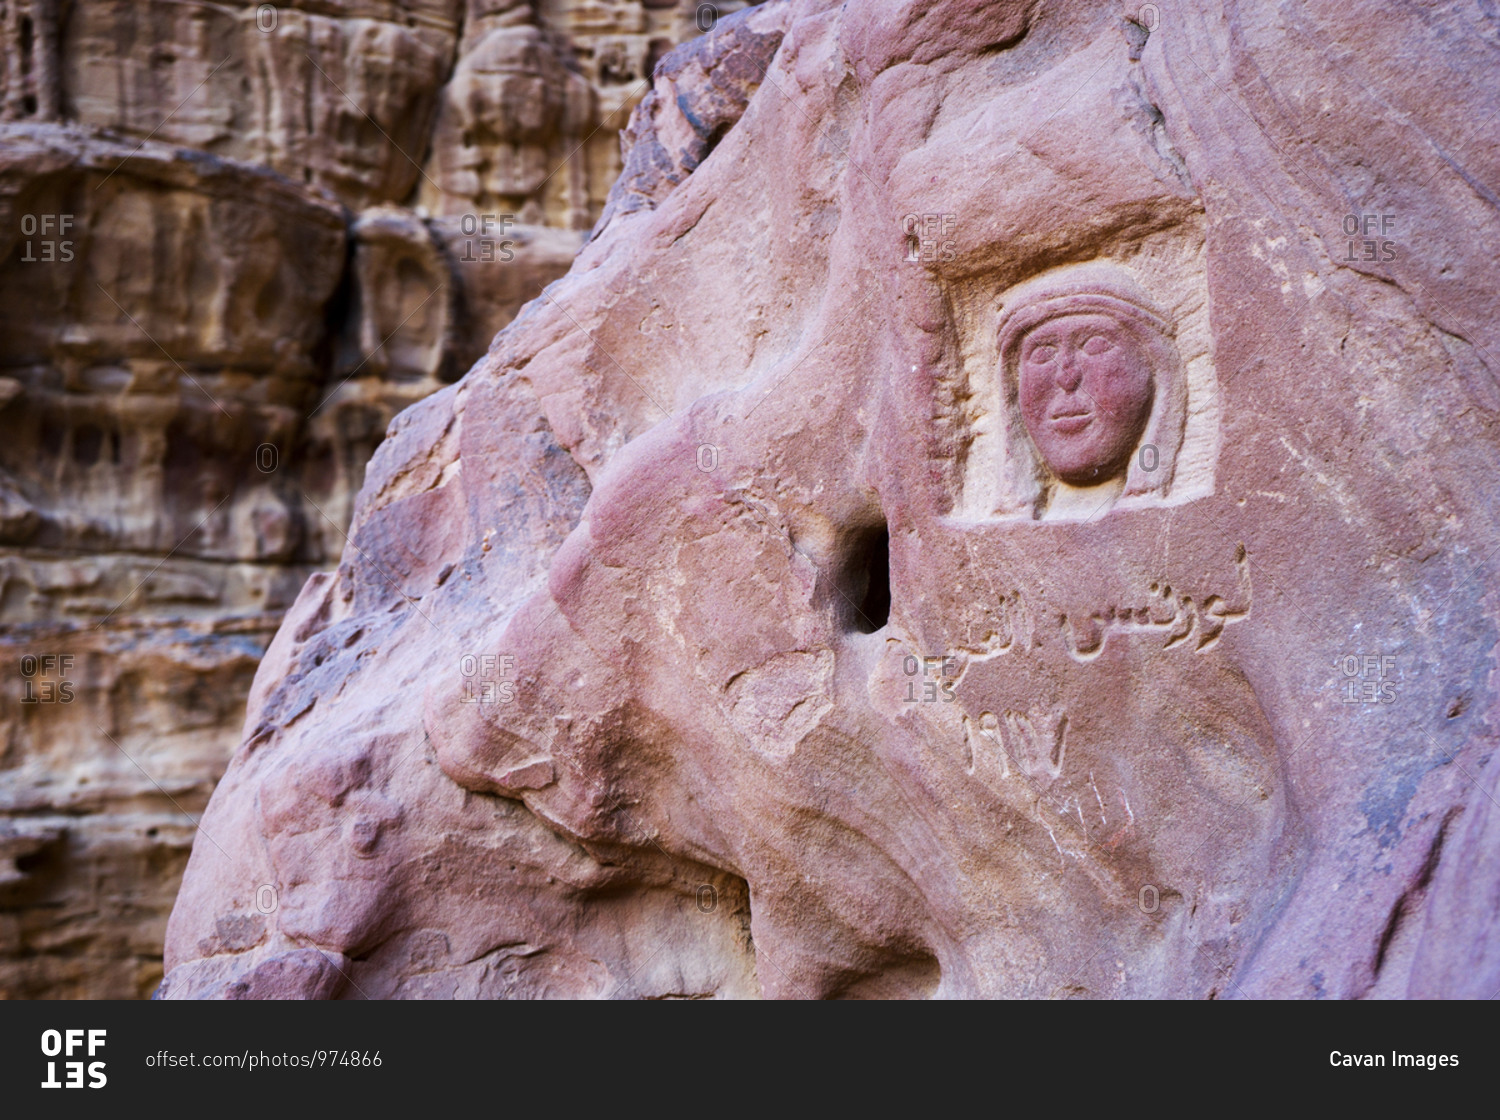 A prehistoric carving and engraving on a rock face in Wadi Rum desert